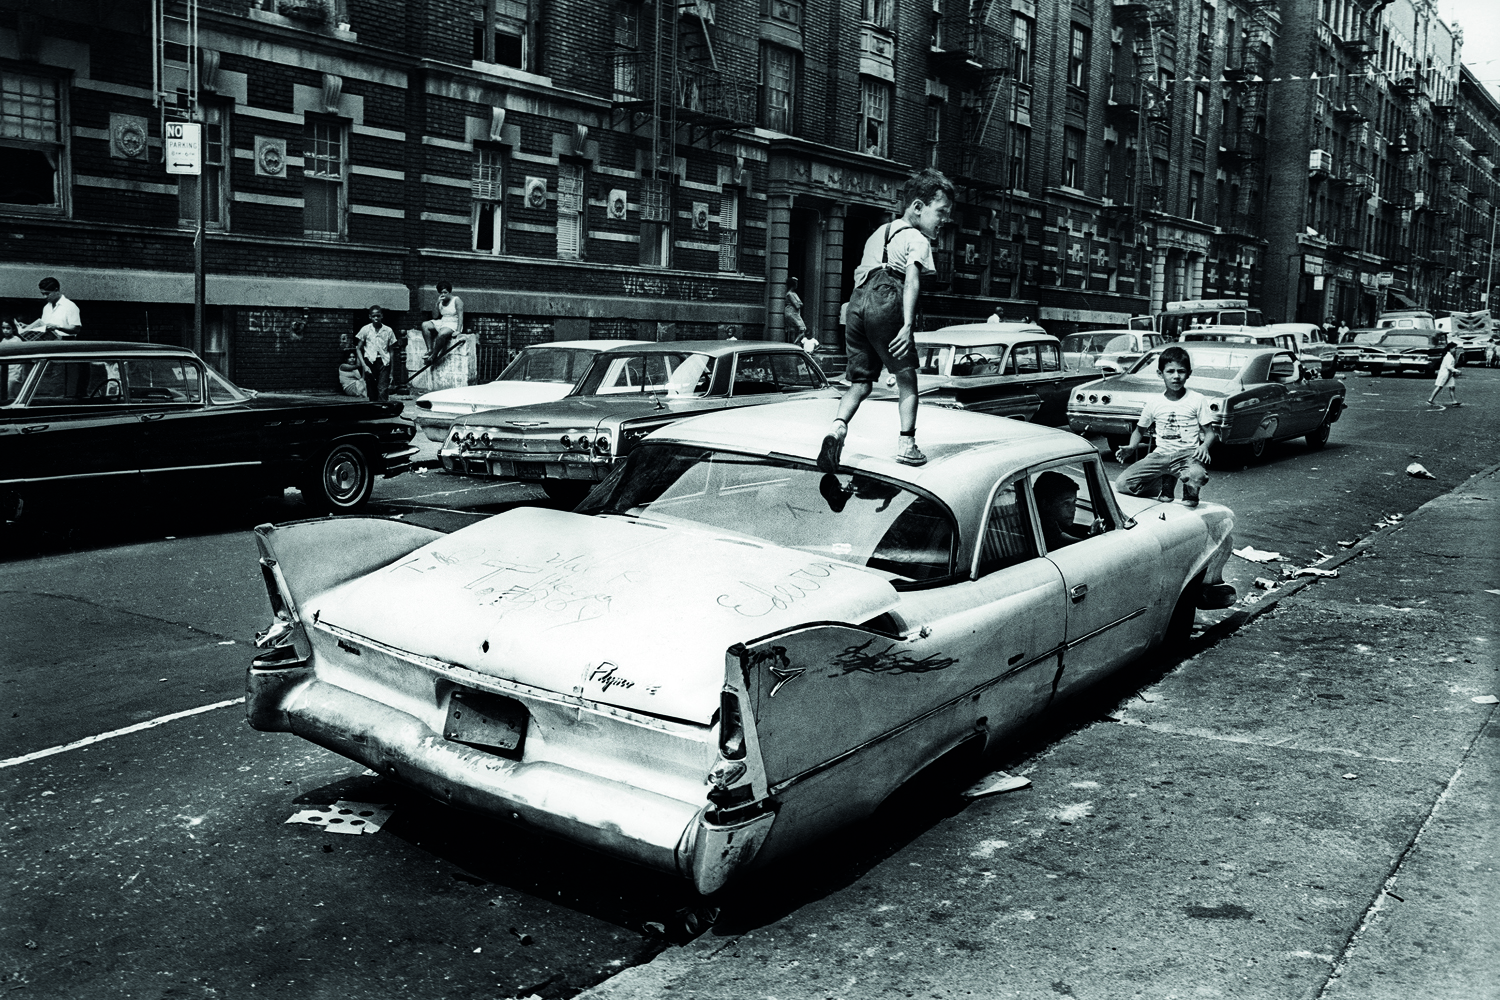 Bronx, New York City, NY. Summer of 1966. An abandoned car becomes a place for kids to play in Fox Street.From the mid-1960s to the late-1970s, quality of life for Bronx residents declined sharply.